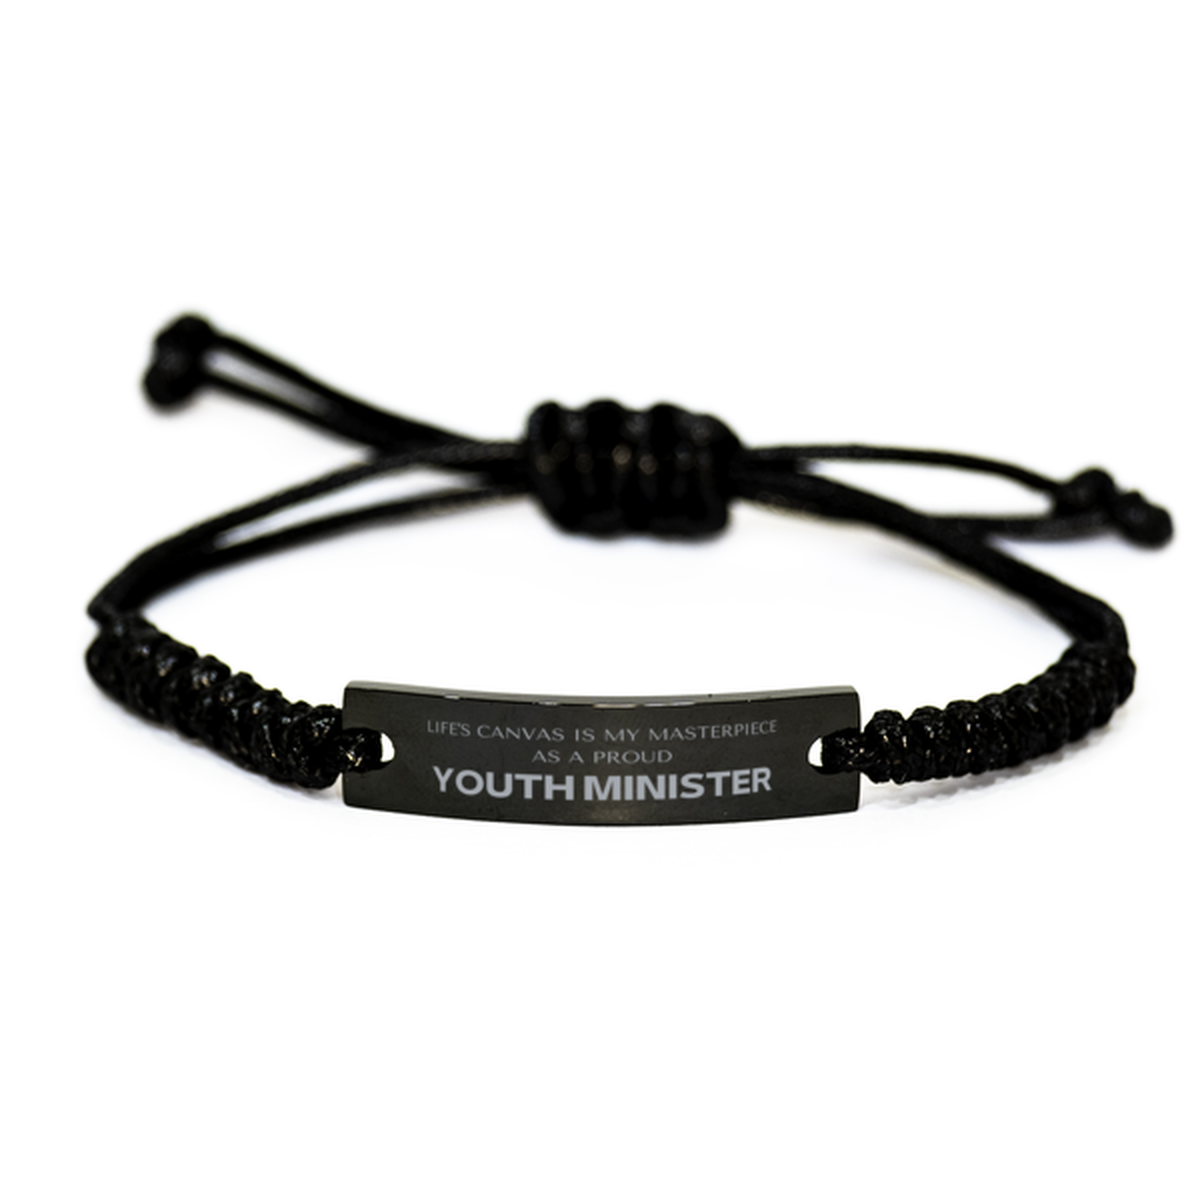 Proud Youth Minister Gifts, Life's canvas is my masterpiece, Epic Birthday Christmas Unique Black Rope Bracelet For Youth Minister, Coworkers, Men, Women, Friends